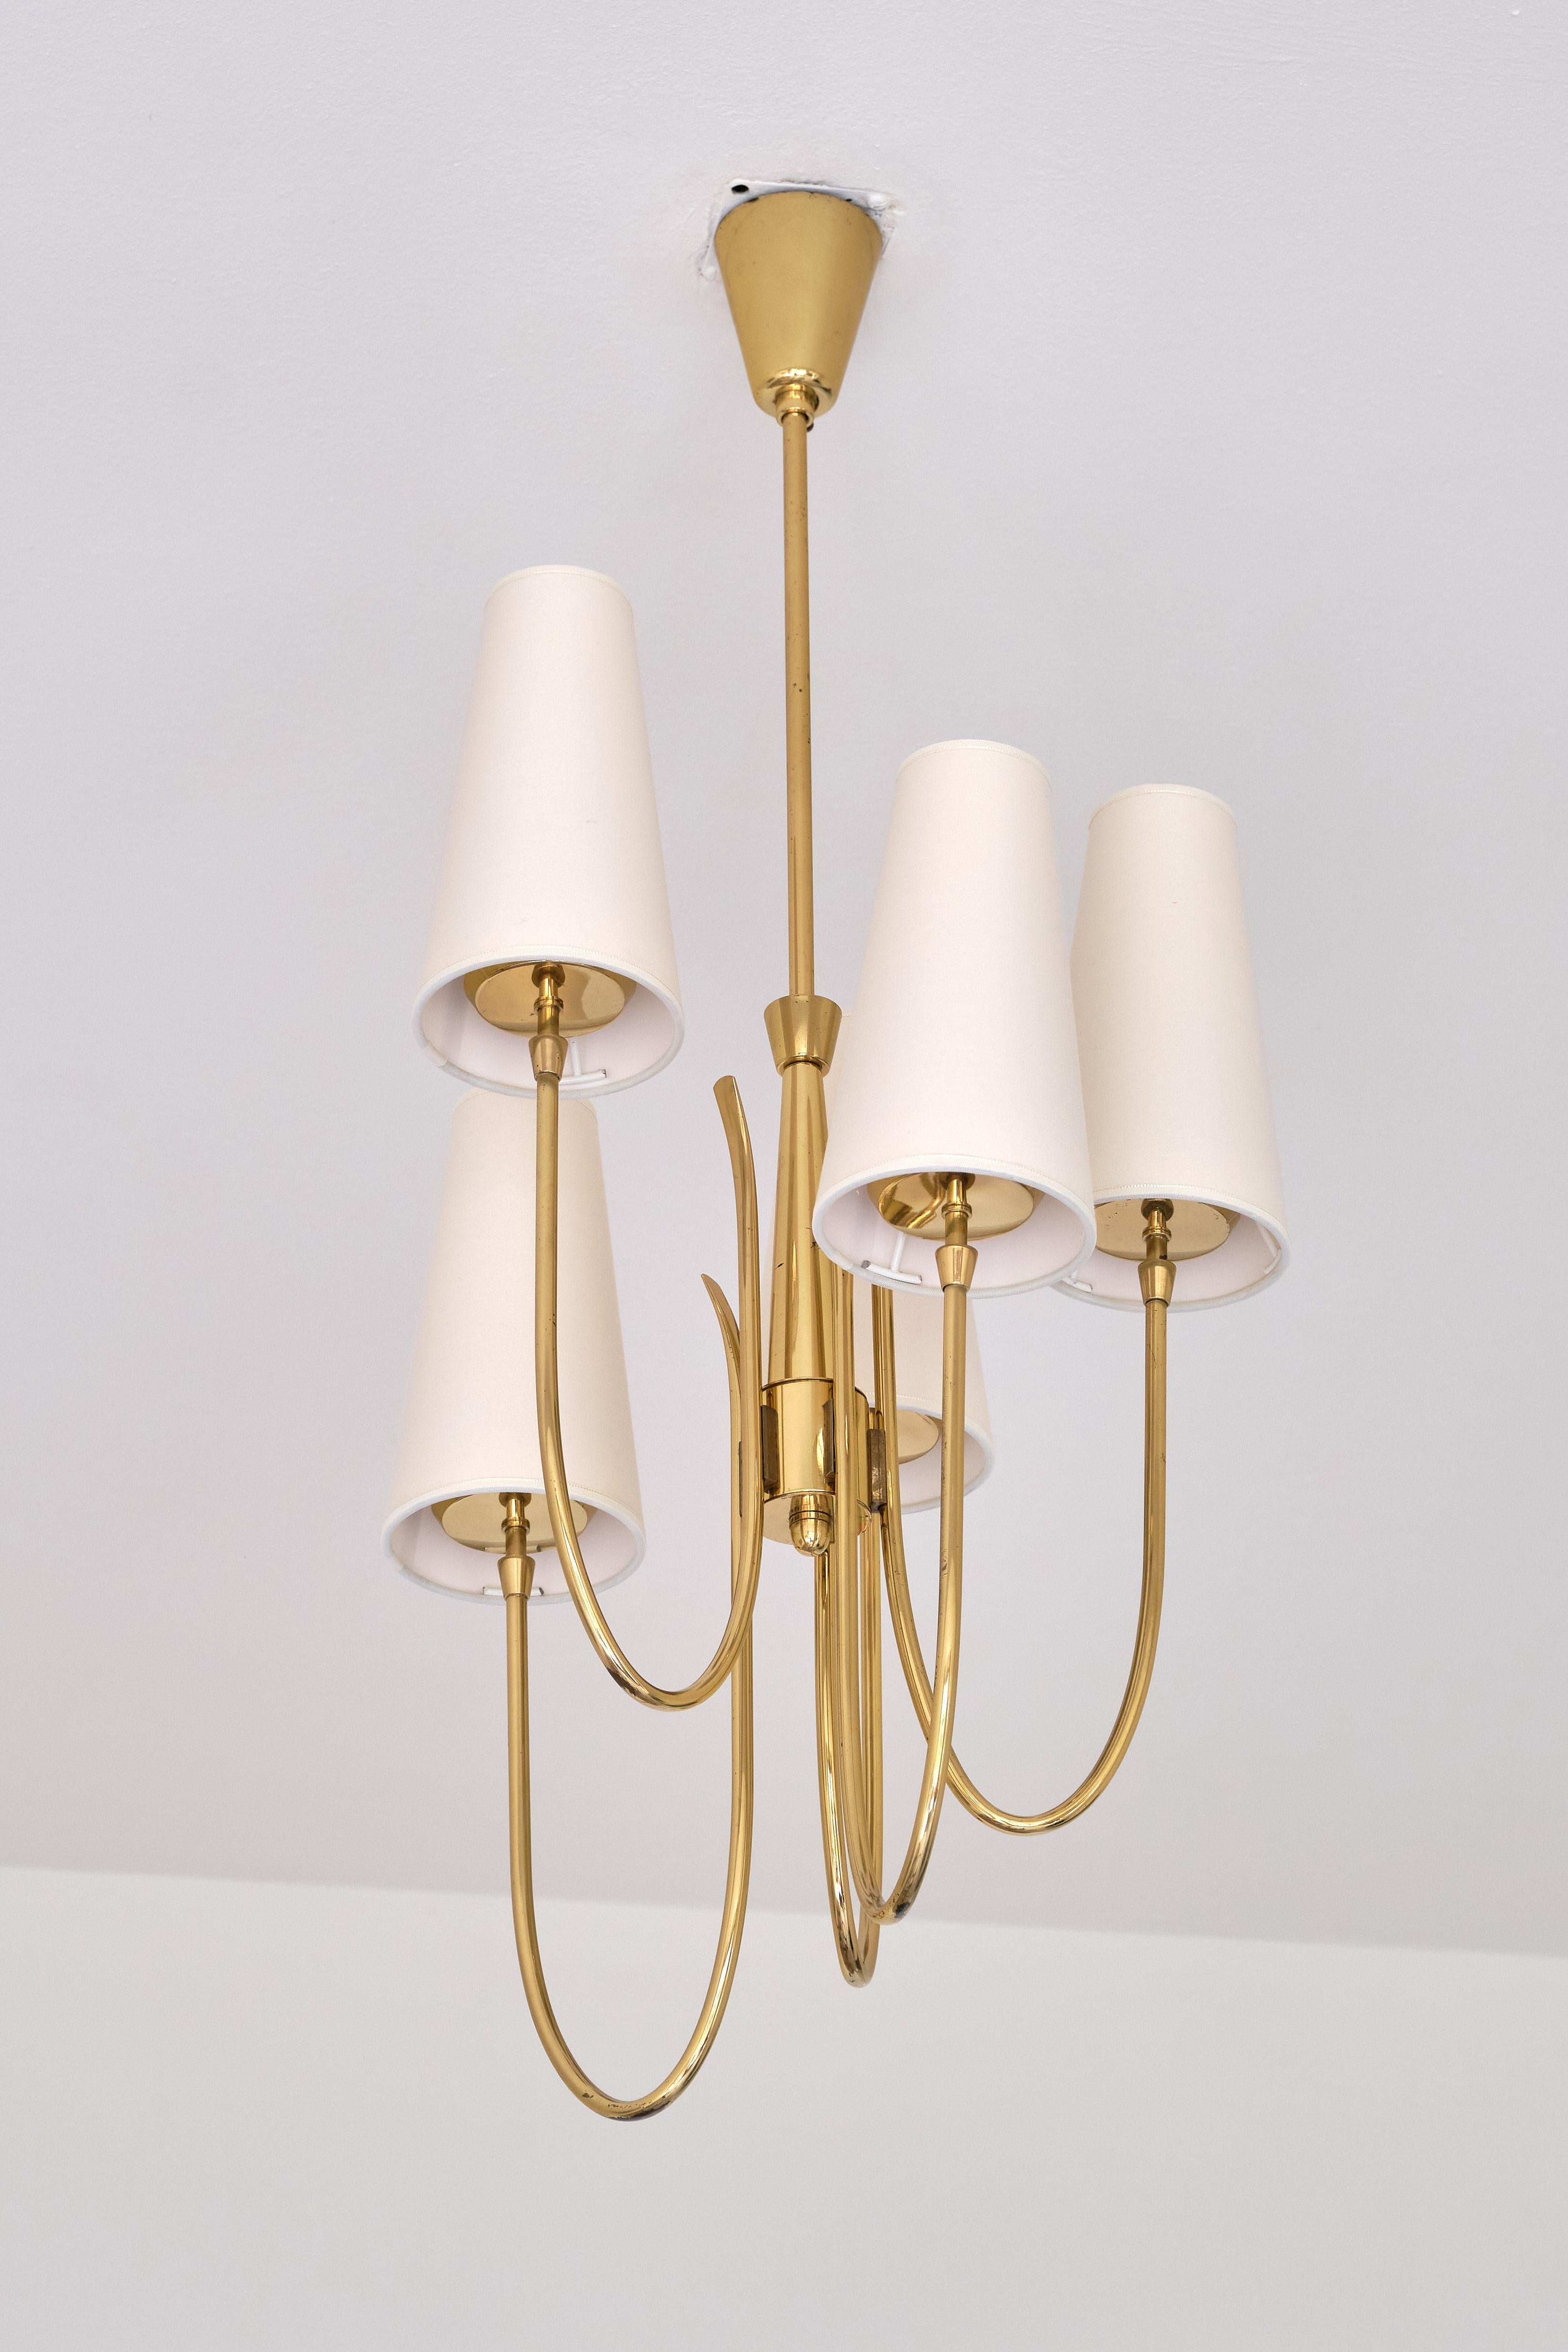 Guglielmo Ulrich Attributed Five Arm Chandelier, Brass and Fabric, Italy, 1940s 8